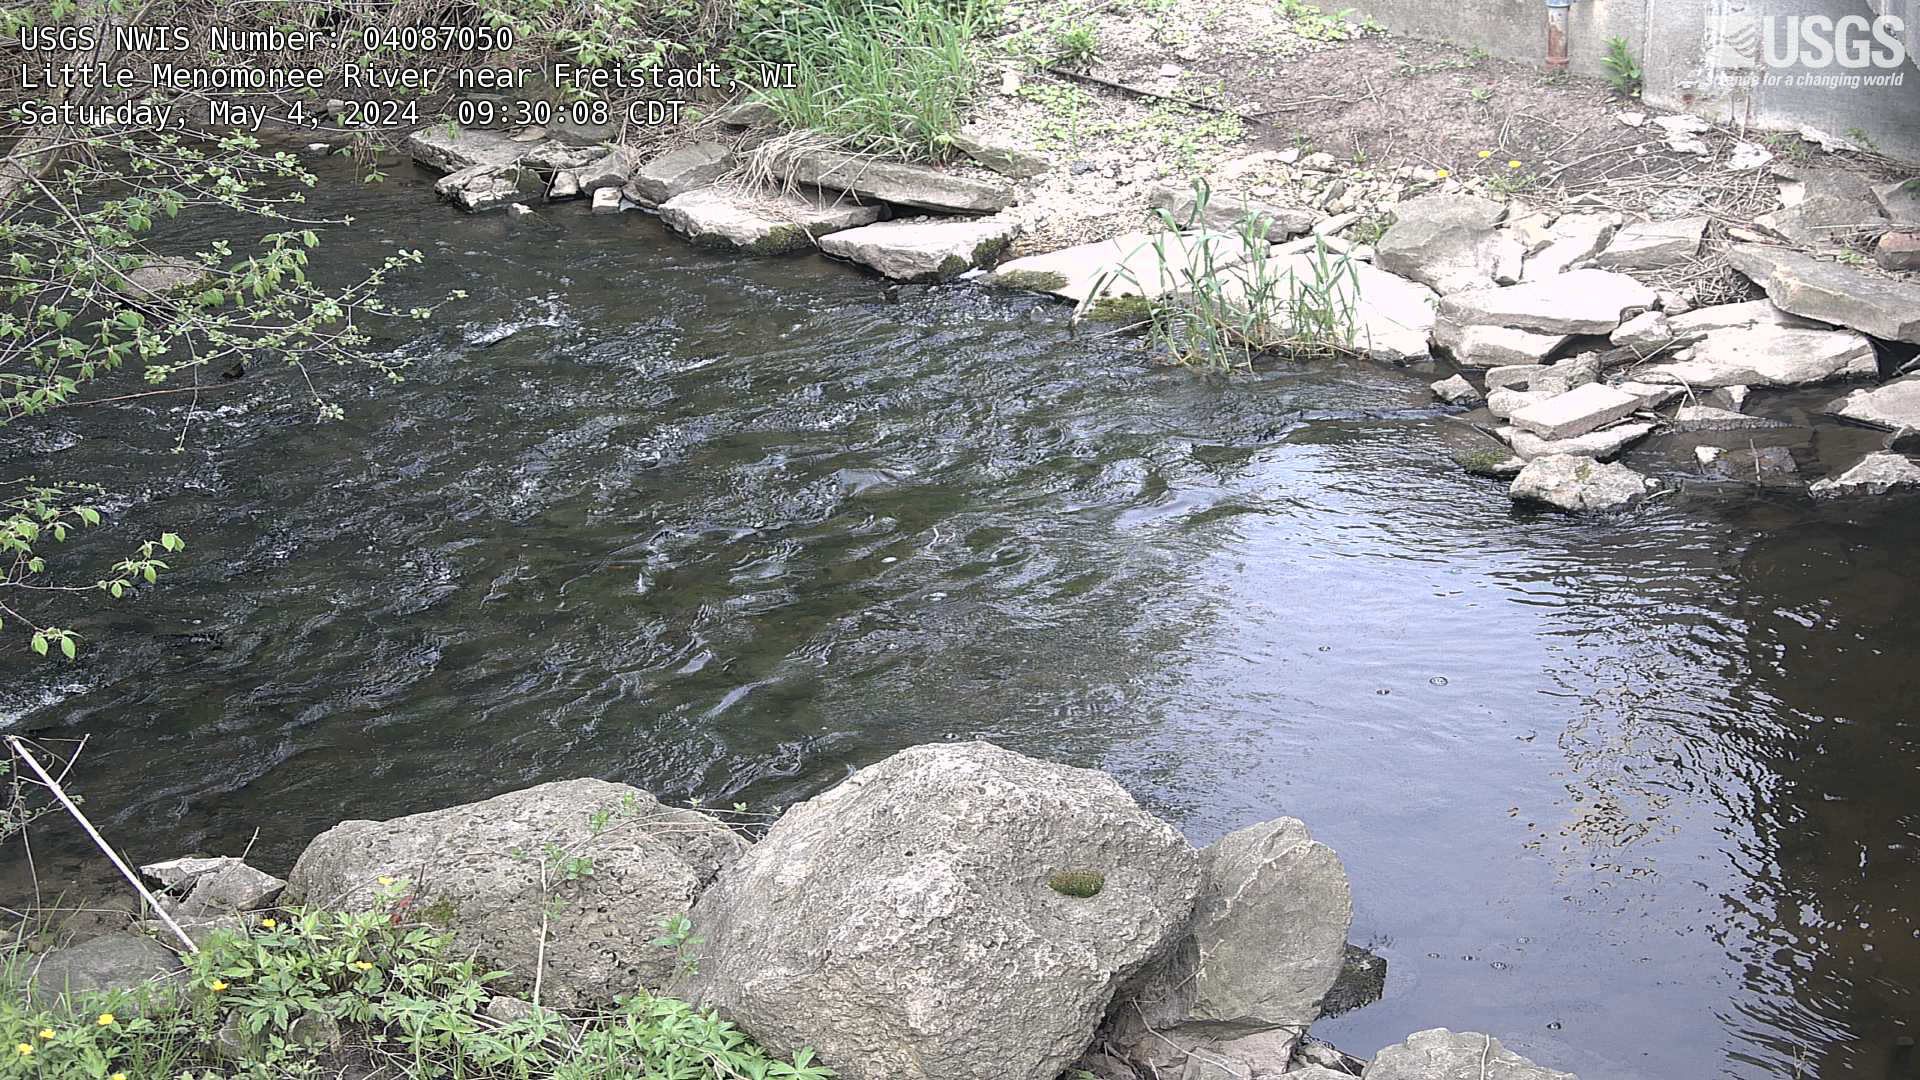 Closeup view of a river, rocky areas on either side.